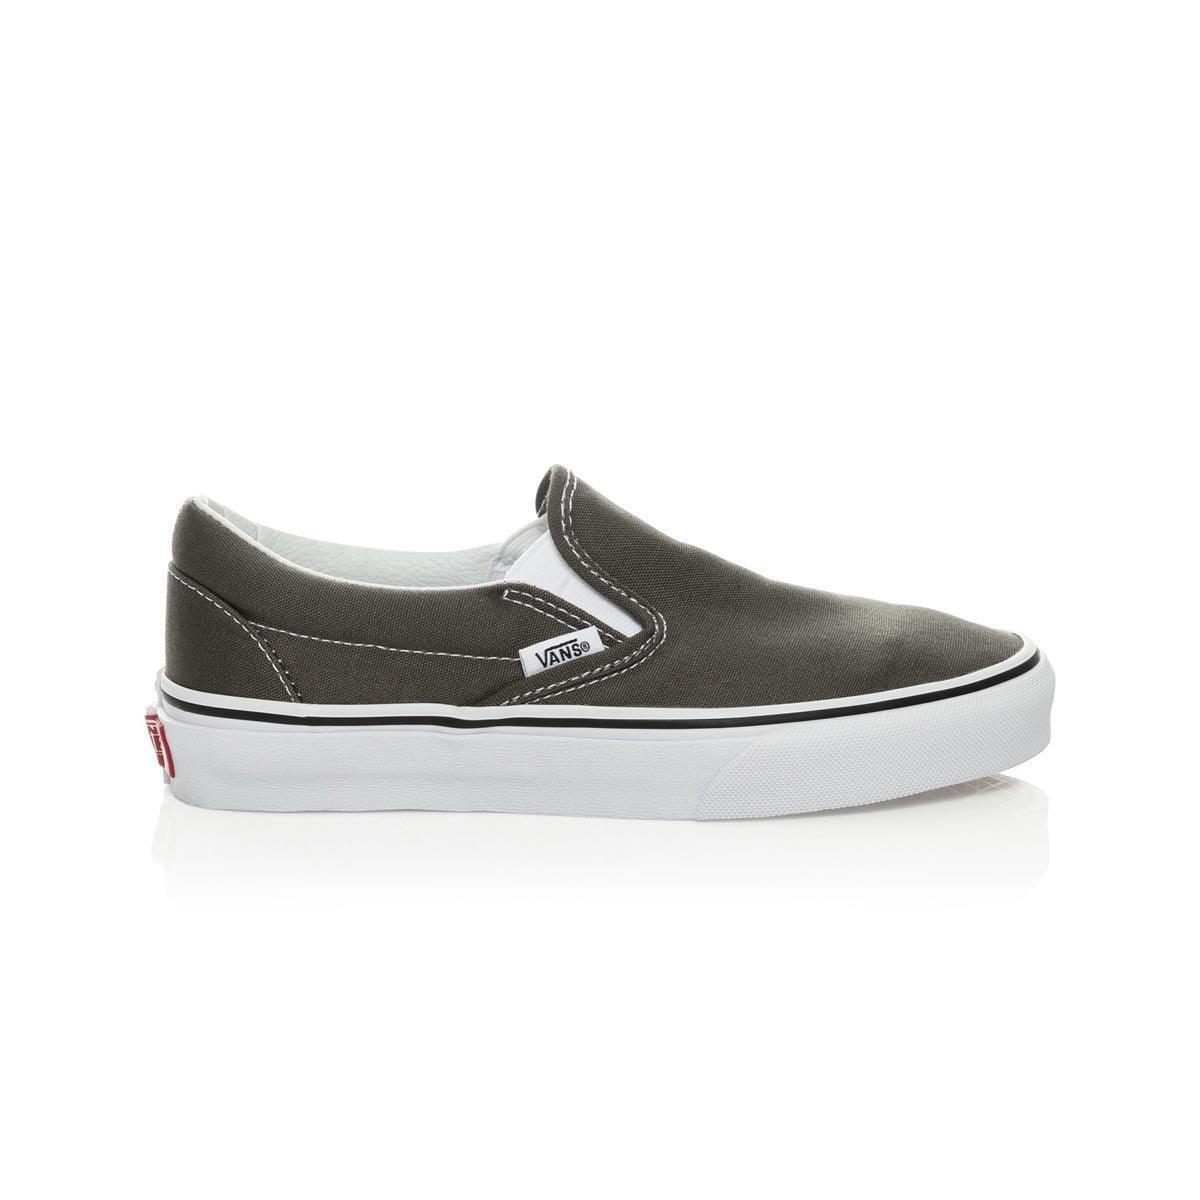 Vans - Classic Slip On Casual Shoes - Mens US 3.5/Womens US 5 - Charcoal